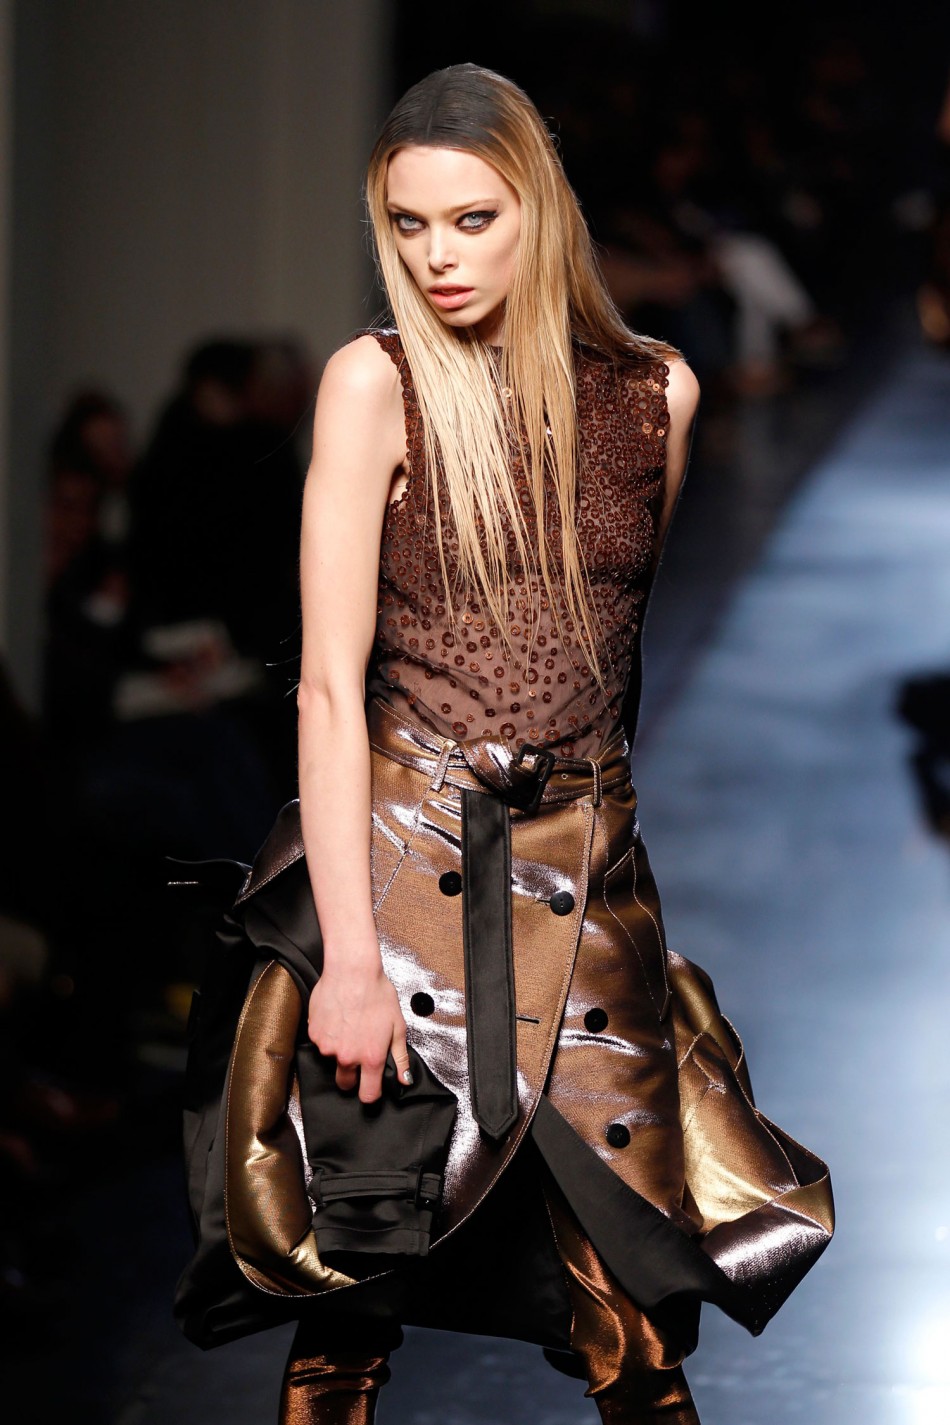 Androgynous Model Andrej Pejic Walks the Ramp for Jean Paul Gaultiers FallWinter Collection